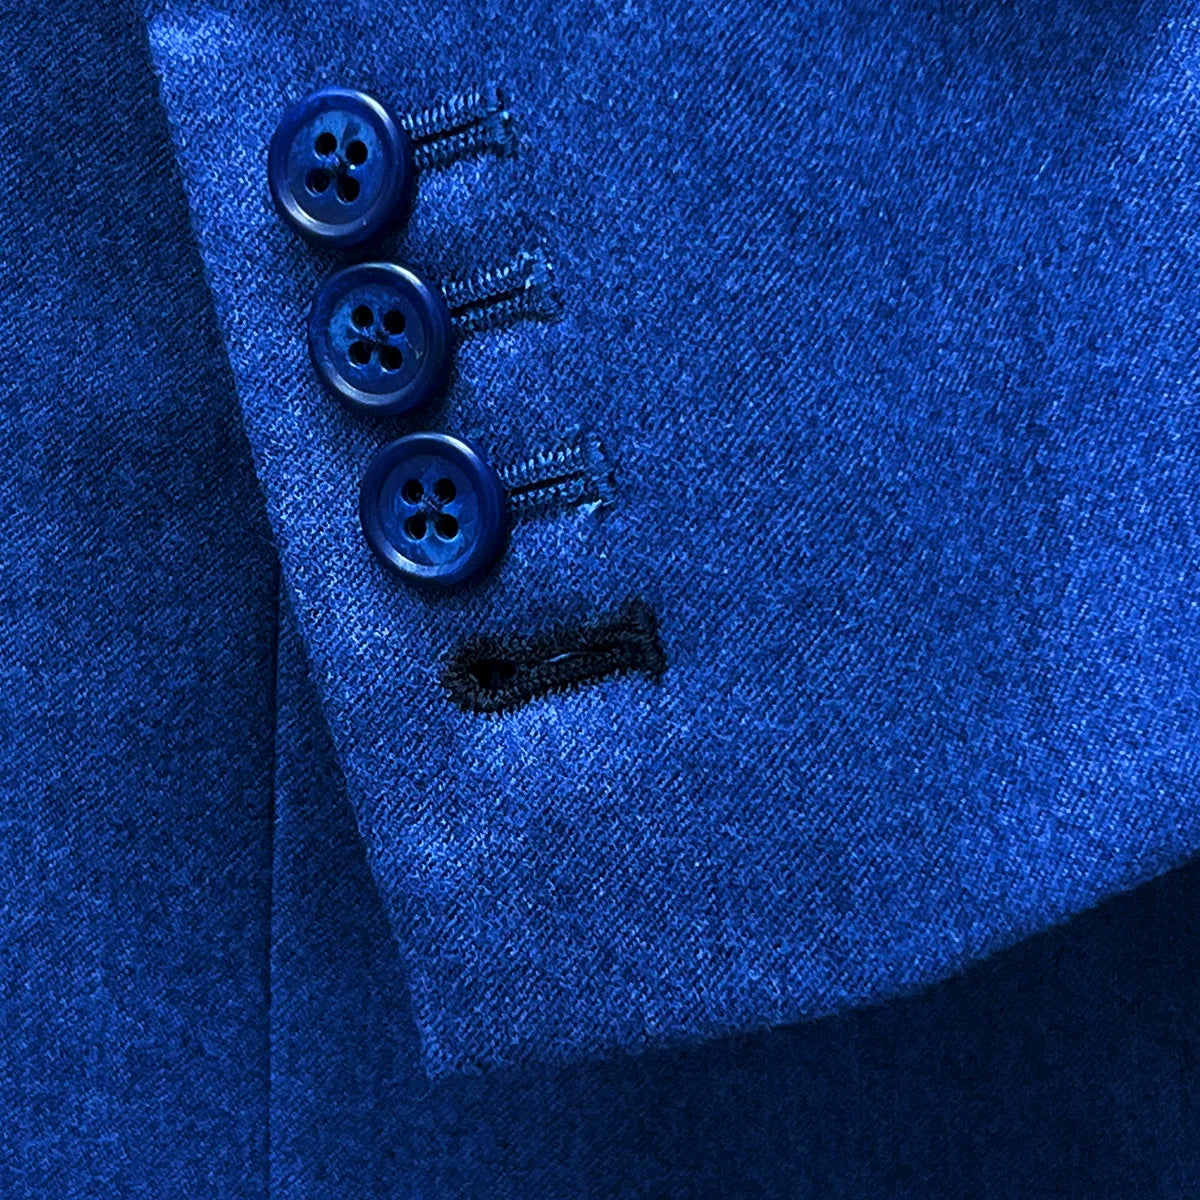 Functional sleeve buttonholes on a light blue flannel sportcoat.